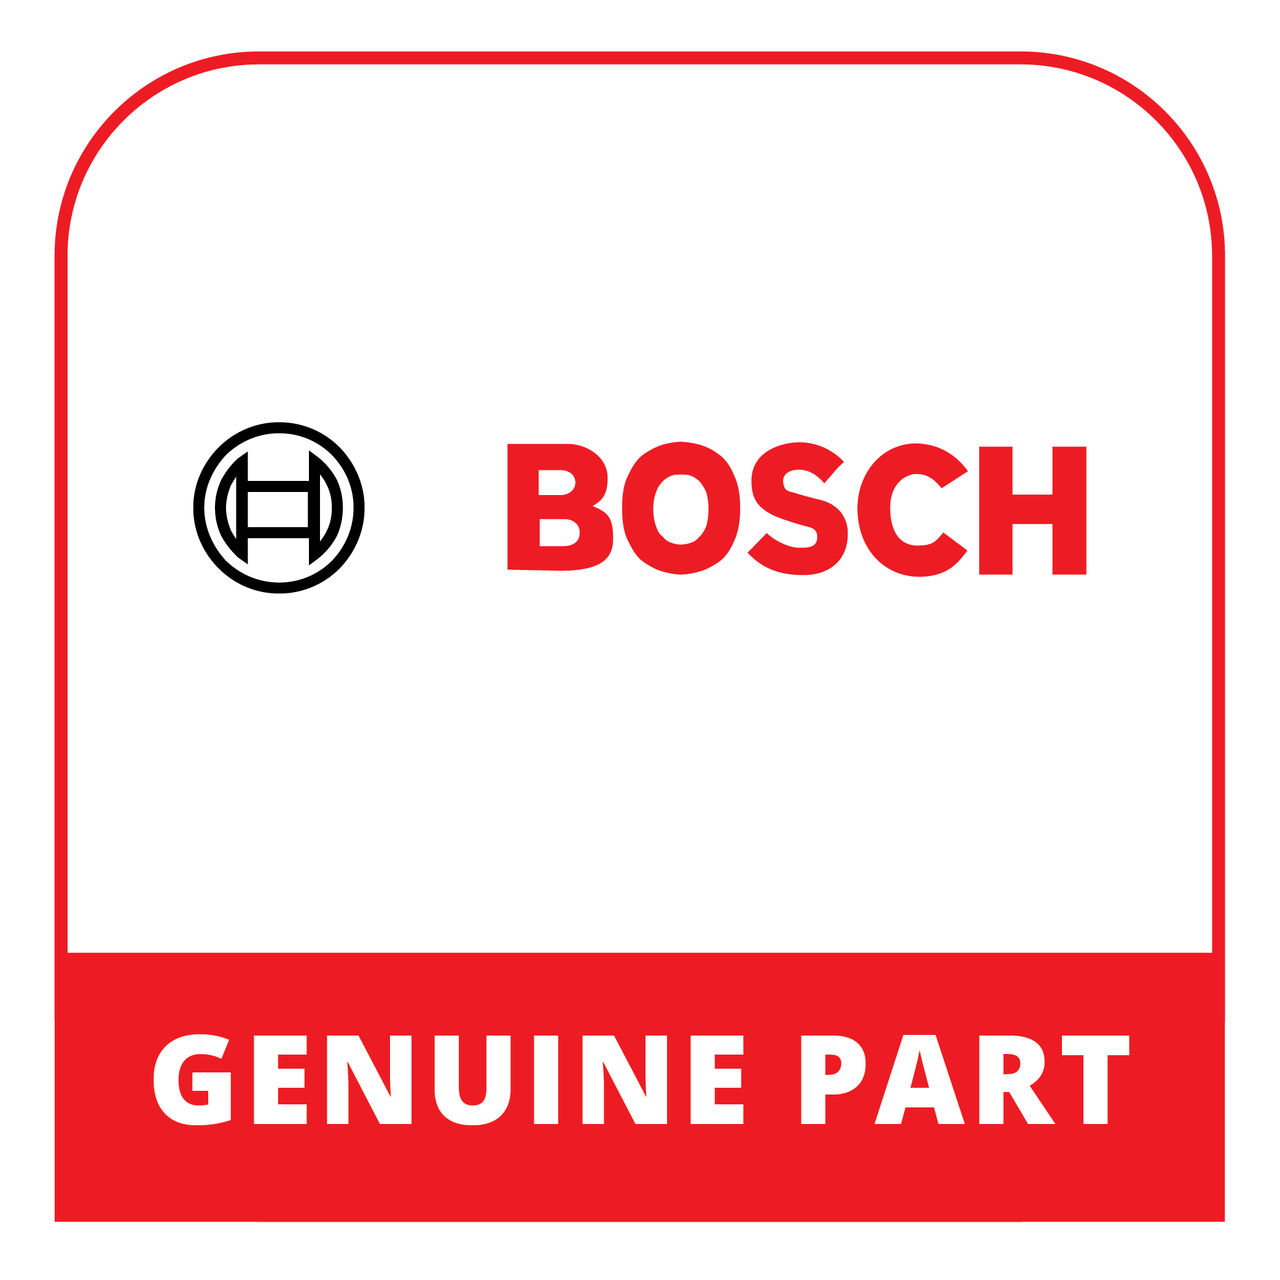 Bosch (Thermador) 20000611 - Panel Side - Genuine Bosch (Thermador) Part